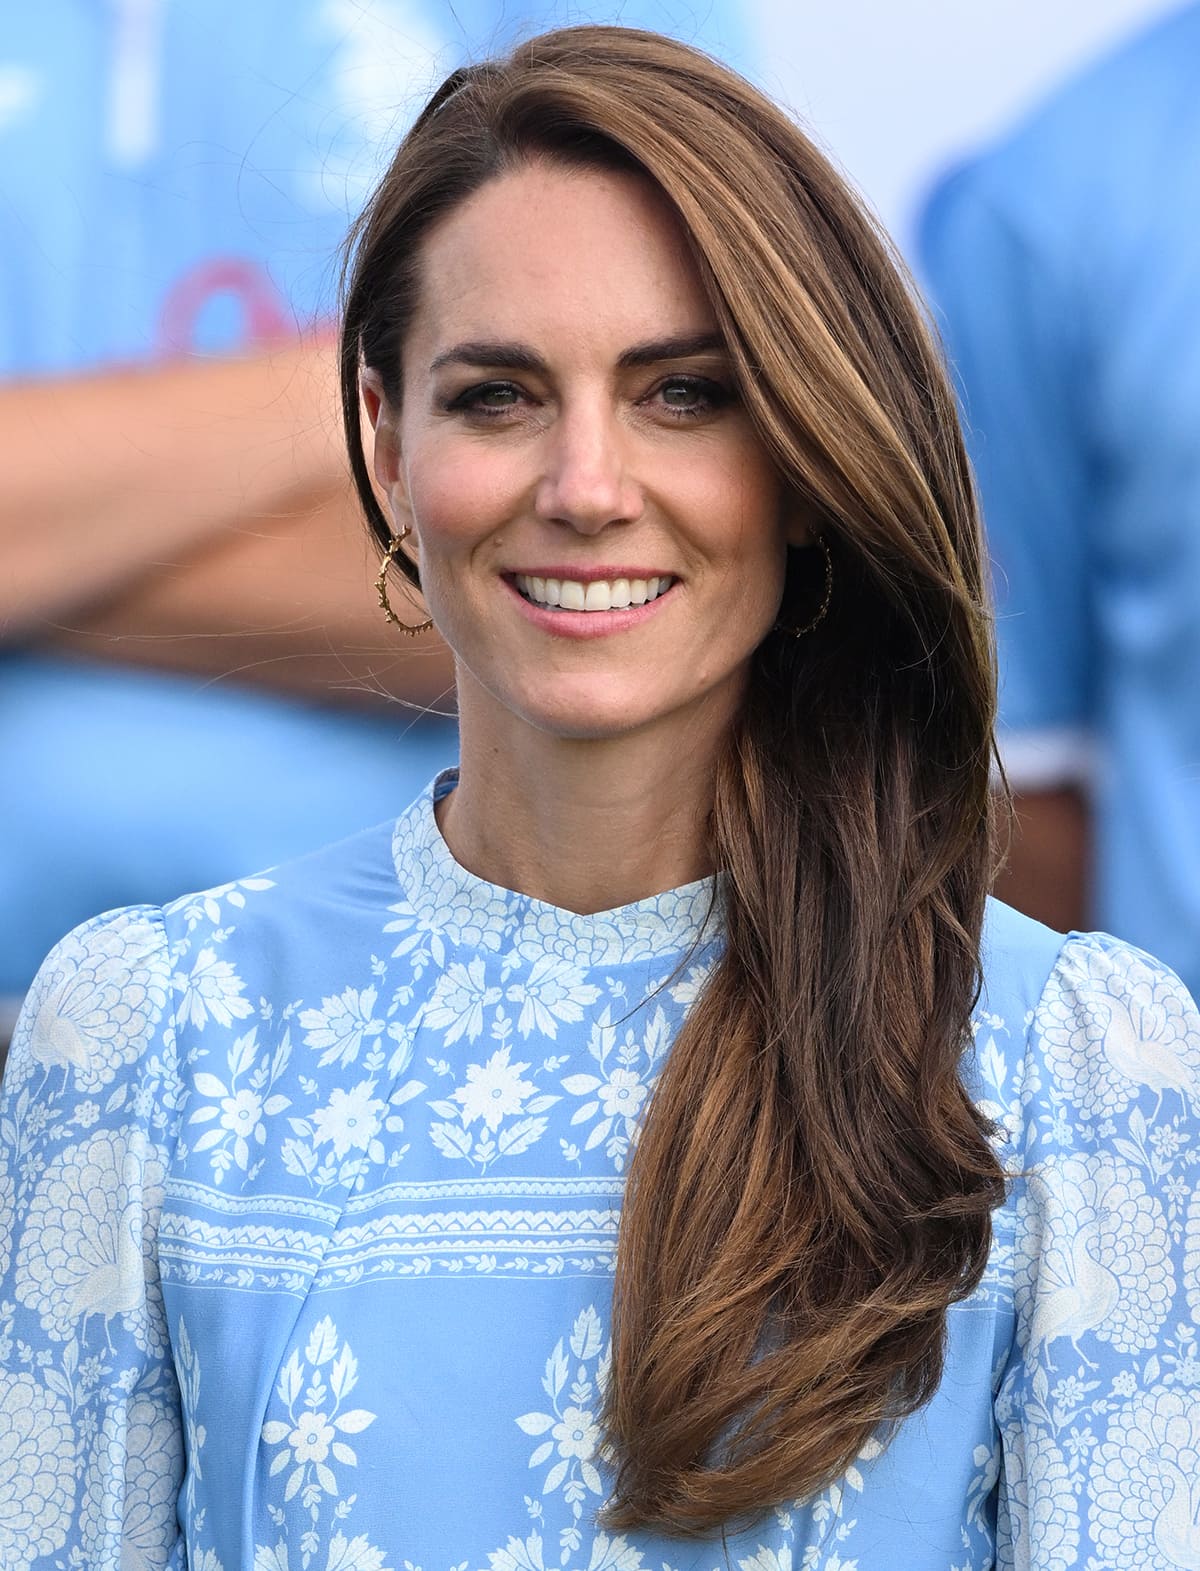 Kate Middleton styles her printed blue dress with Lenique Louis Spine Hoop Earrings and wears her tresses in side-parted loose waves